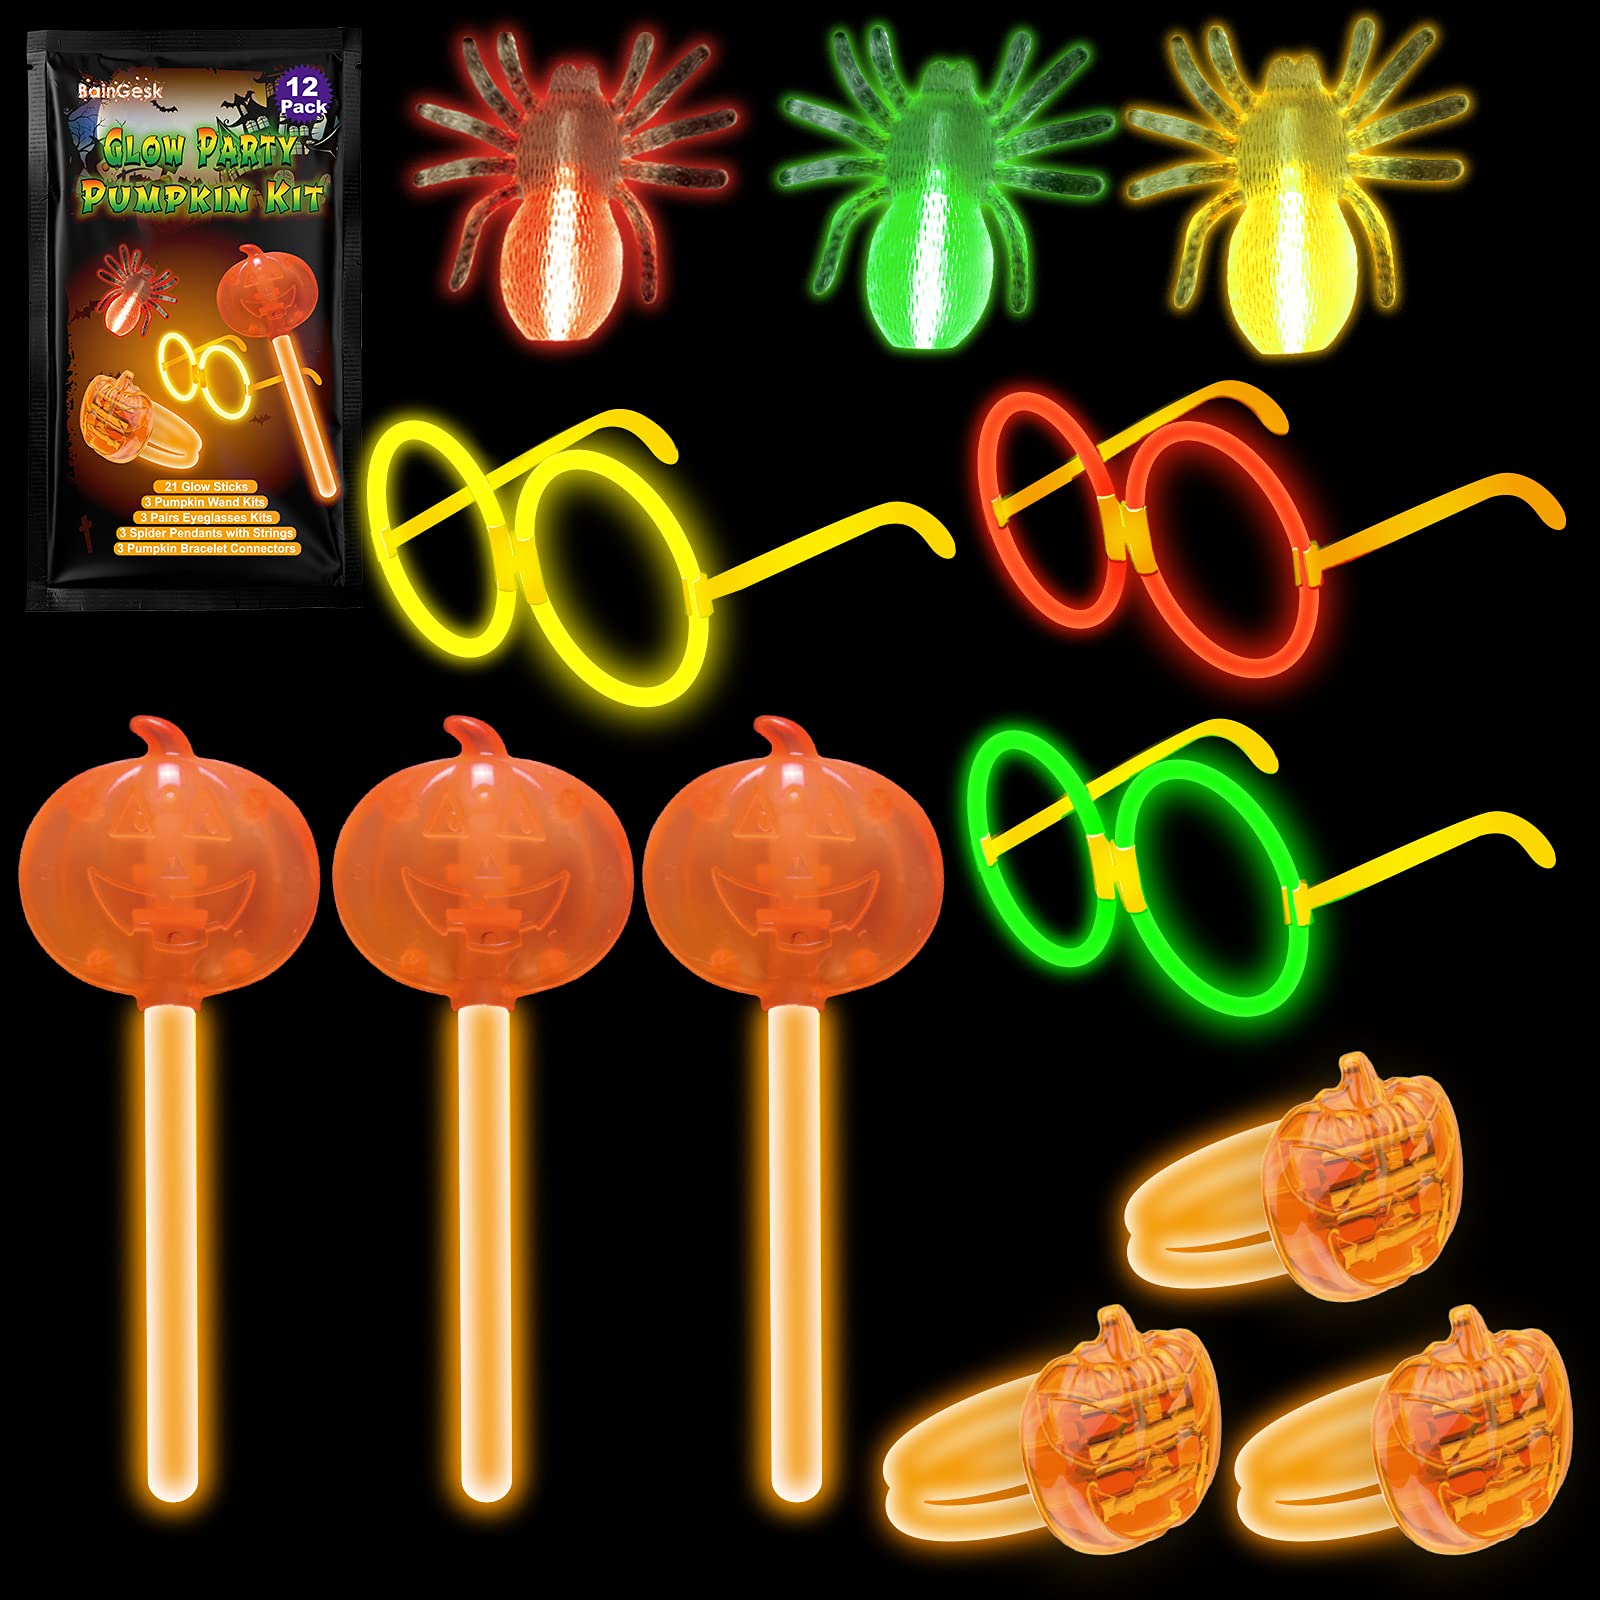 BainGesk Halloween Glow Sticks, Pumpkin Set Party Gift for Kid, 36pk Glow in the Dark Party Favor, Trick or Treat Party Decoration with 3 Fake Bugs, 3 Pumpkin Wand, 3 Pumpkin Bracelets, 3 Glasses